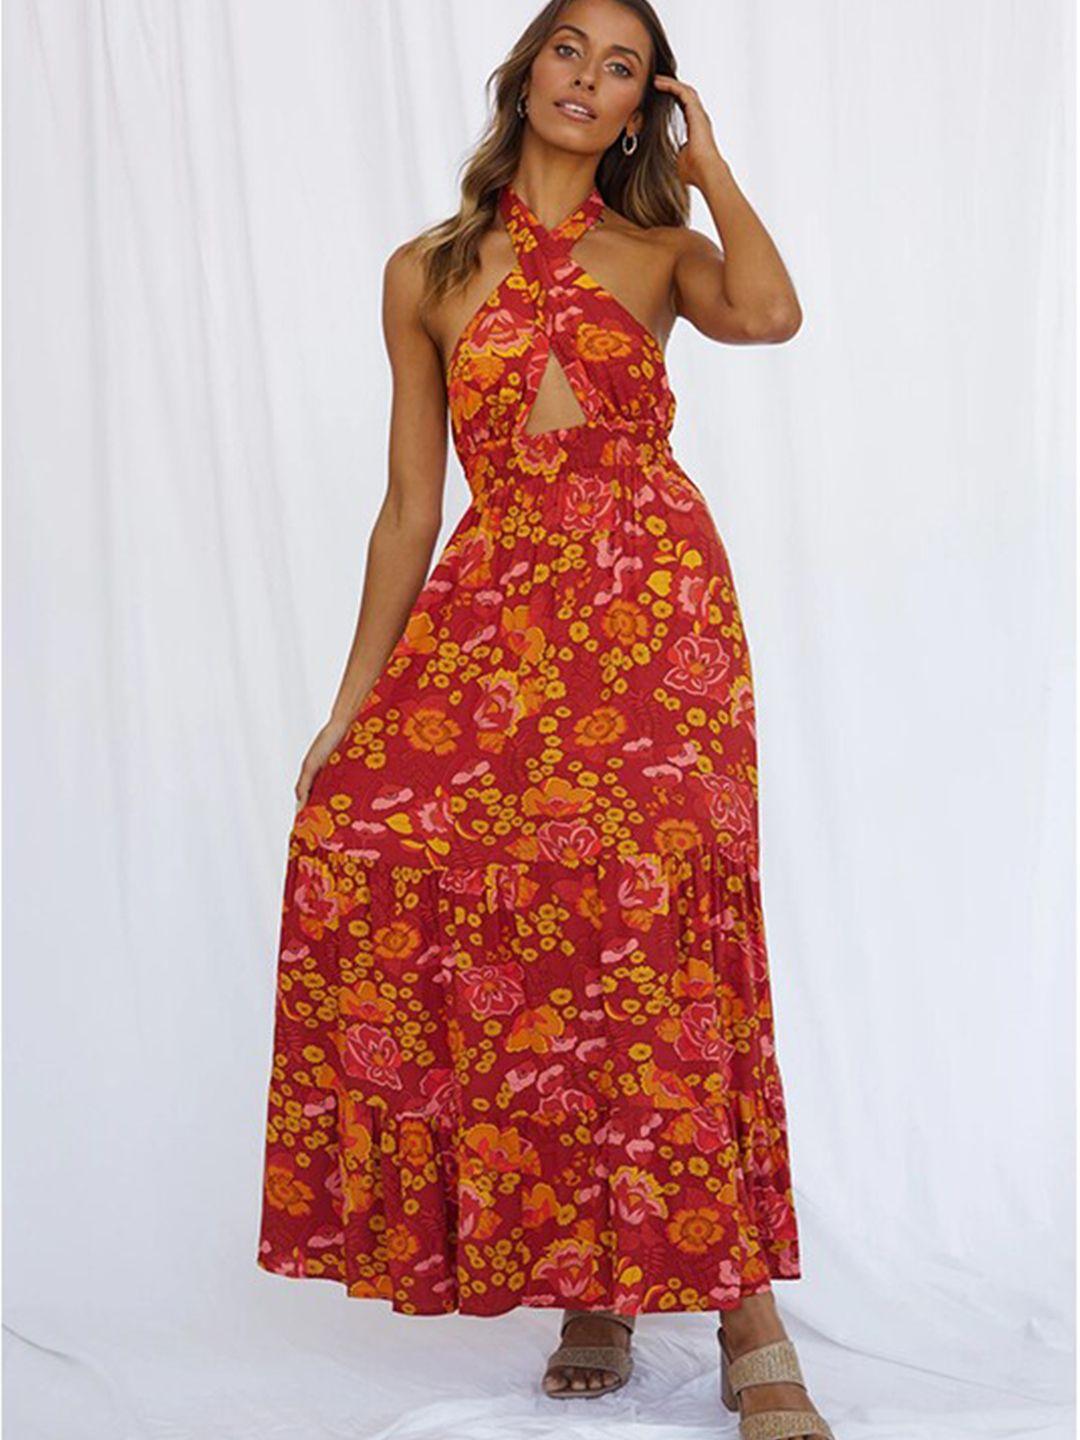 stylecast red floral printed halter neck cut-out detailed maxi dress